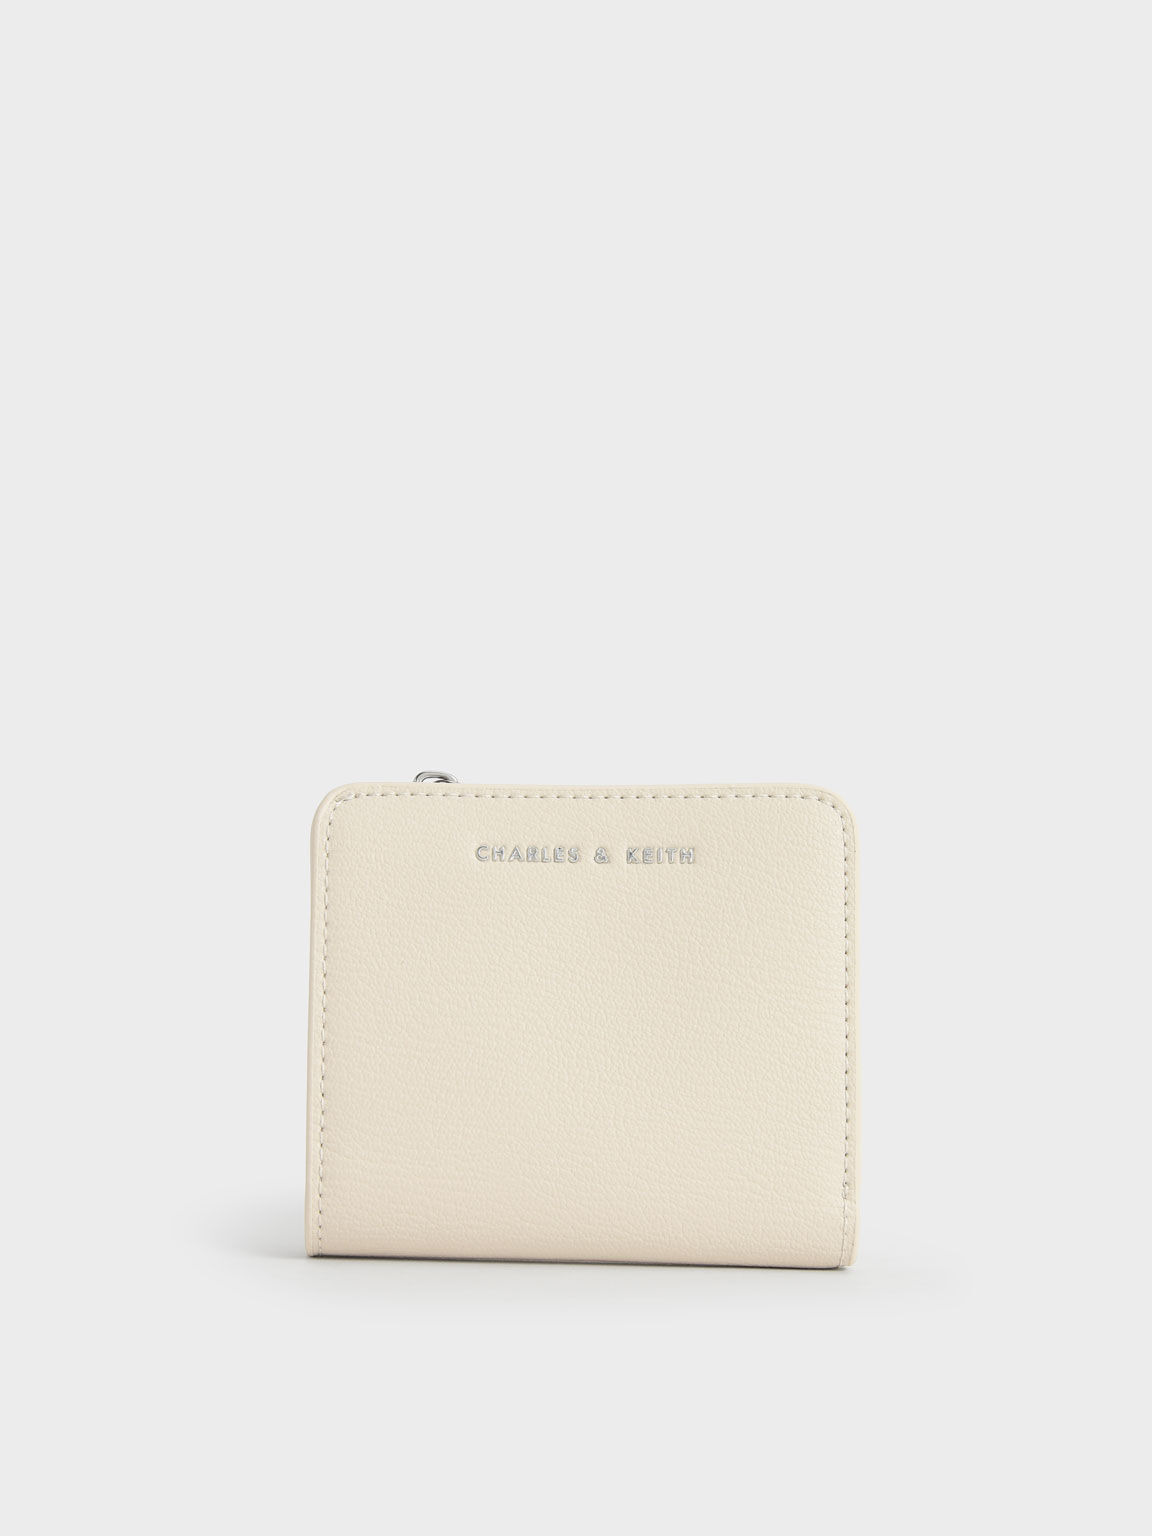 Women's Wallets | Shop Exclusive Styles | CHARLES & KEITH UK